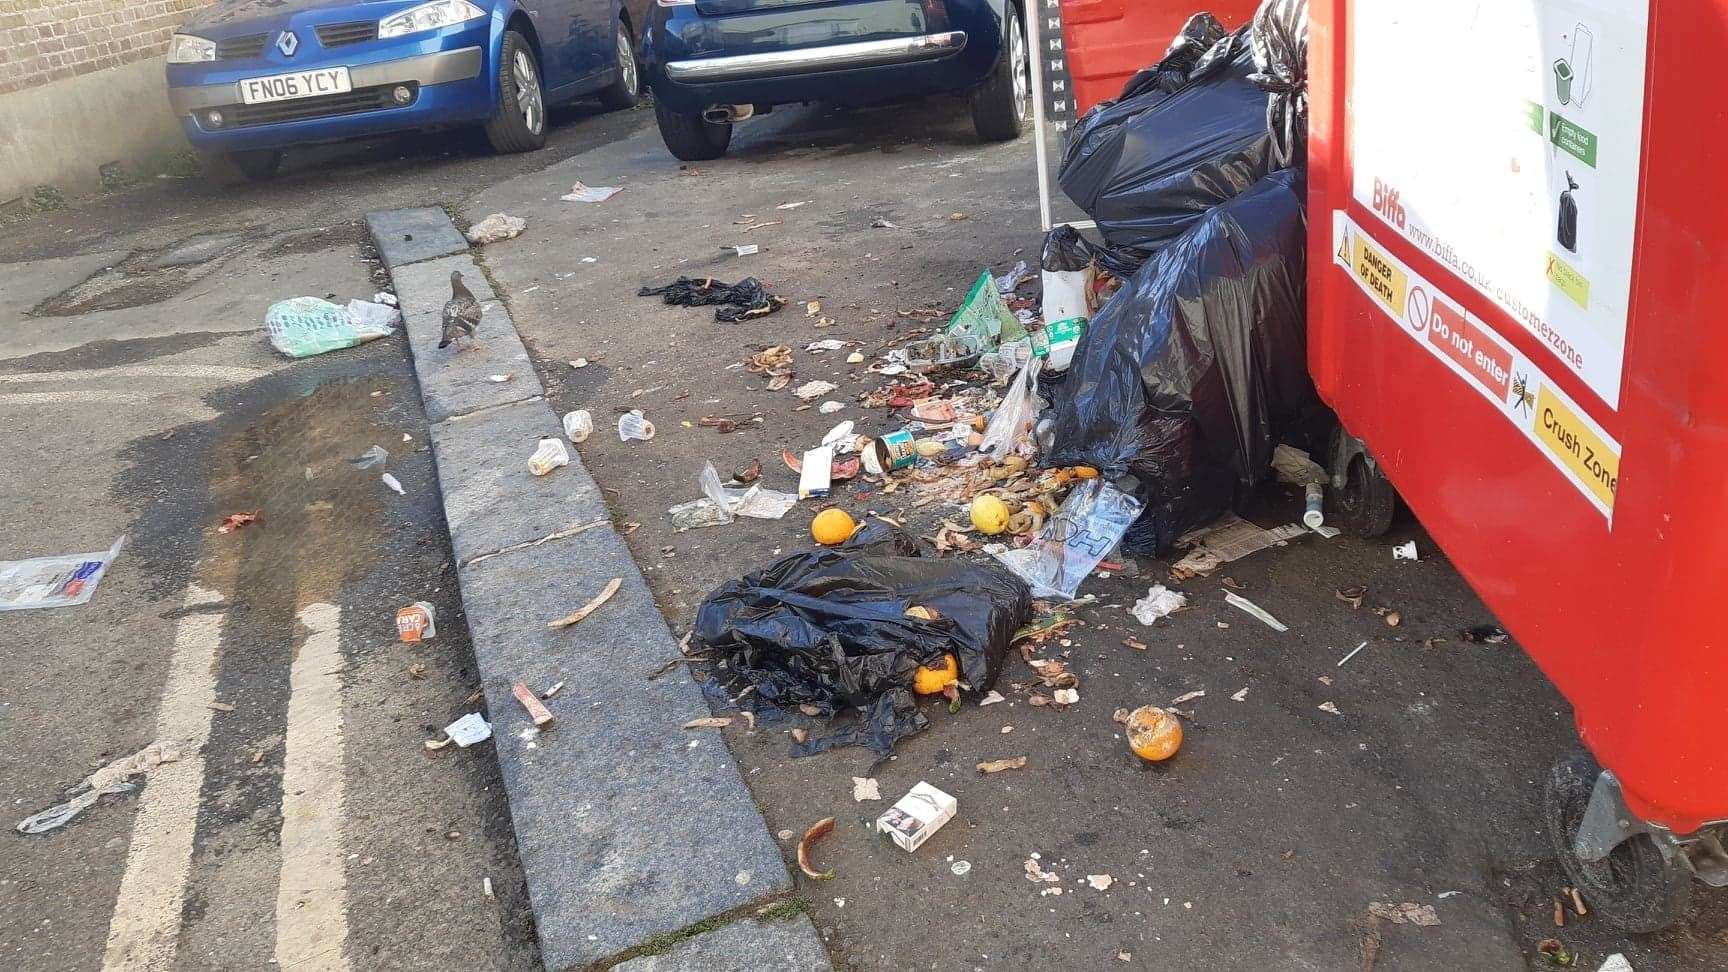 DDC says these bin bags have been illegally dumped in New Street